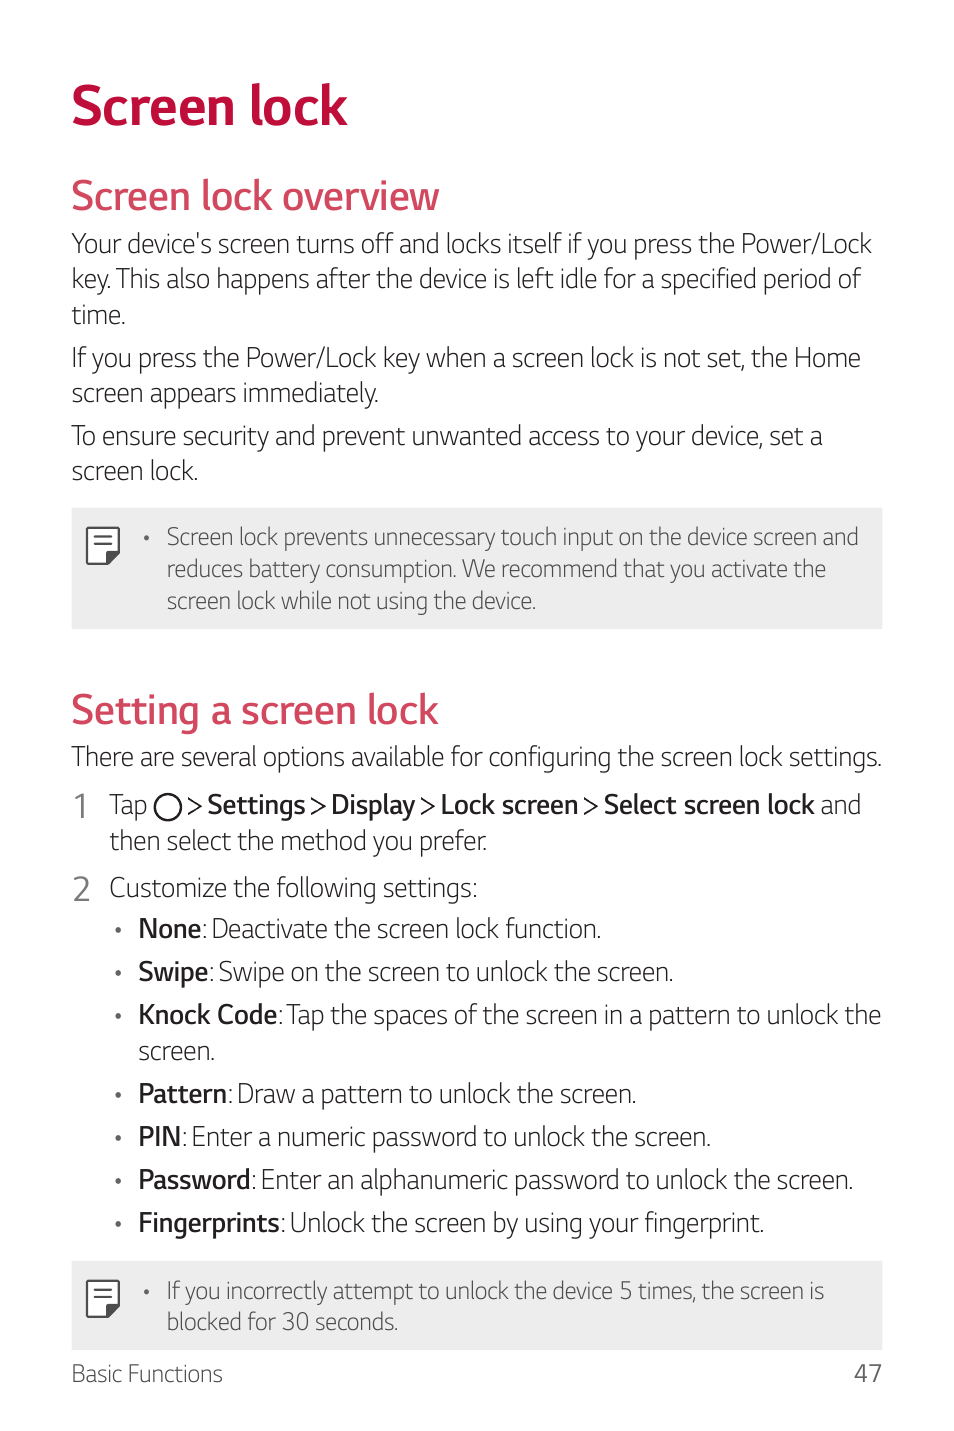 Screen lock, Screen lock overview, Setting a screen lock | LG G6 H872 User Manual | Page 48 / 183